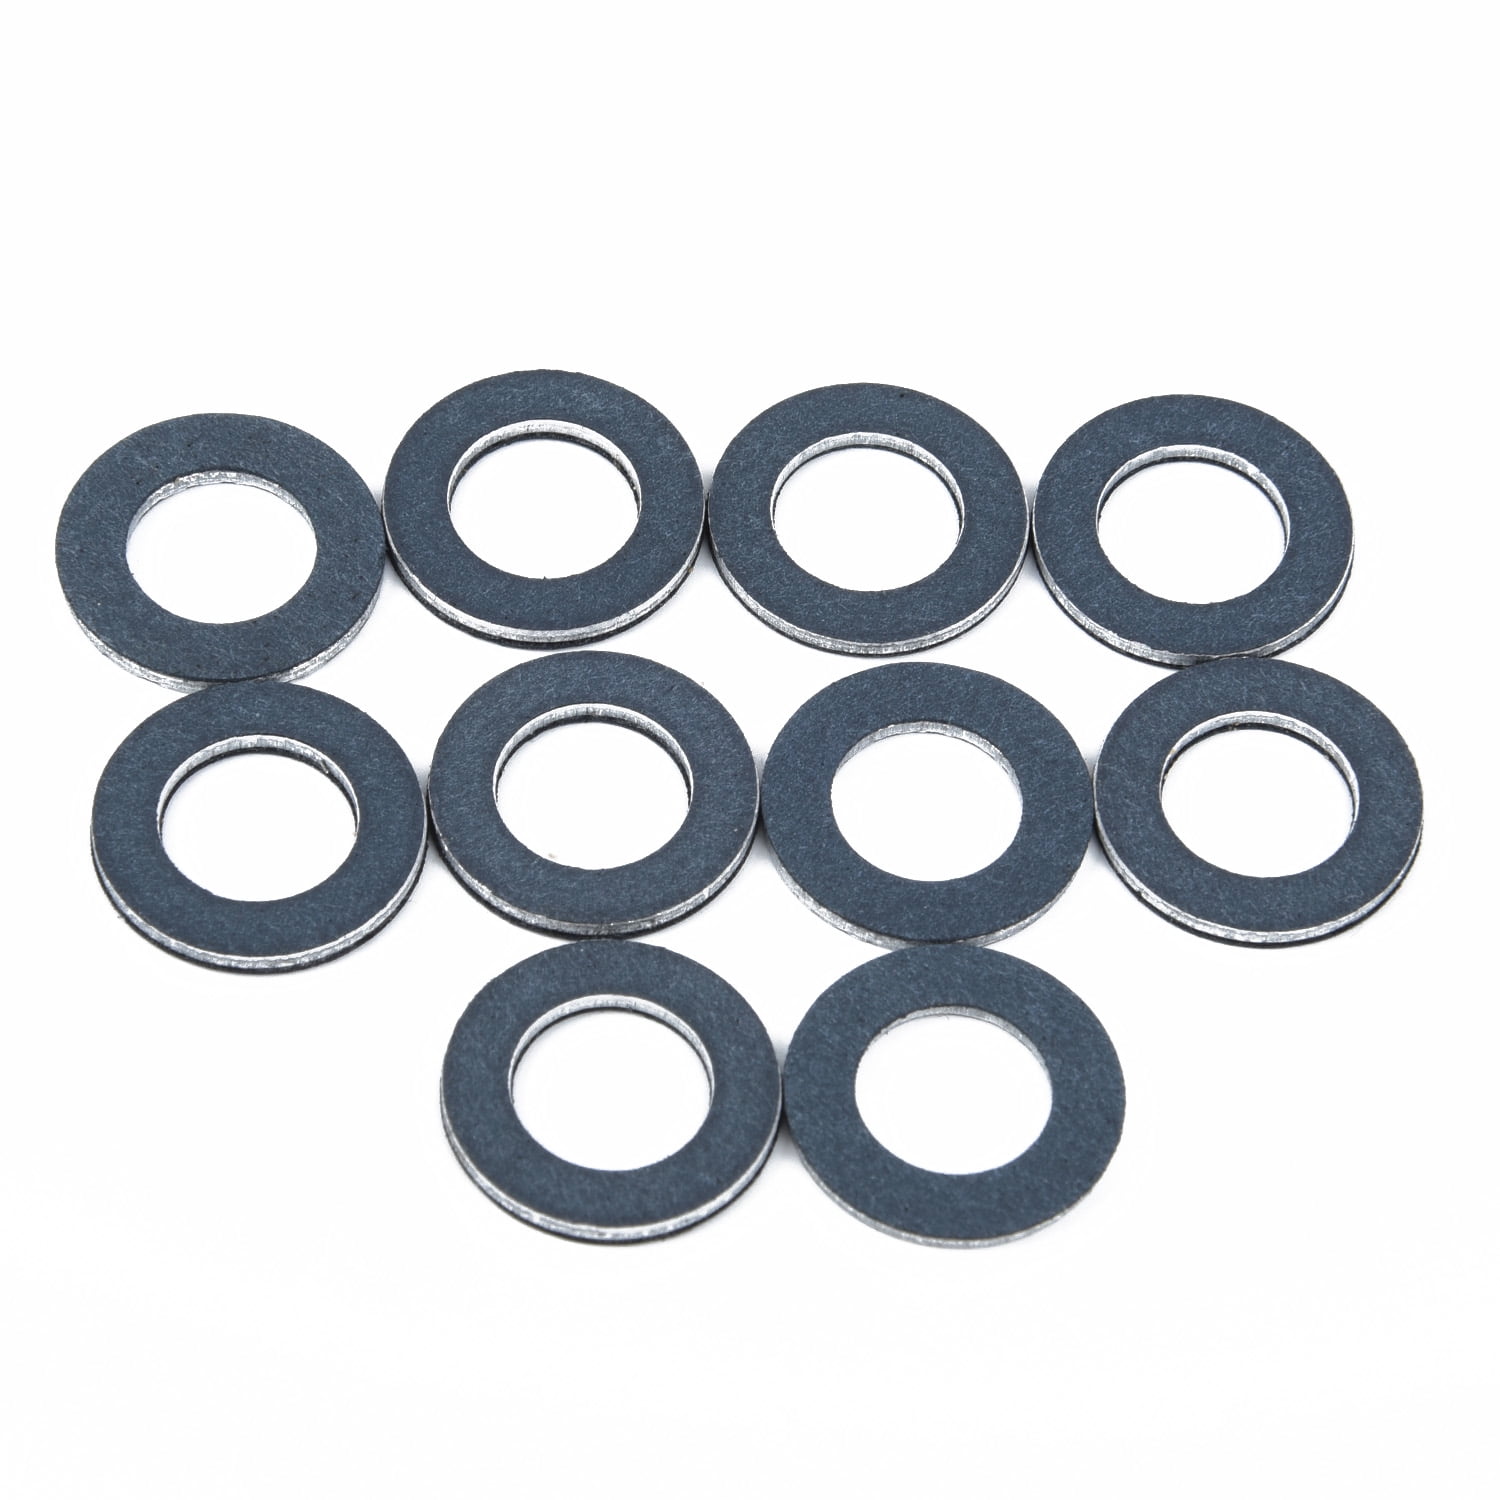 Baugger 10Pcs Oil Drain Plug Washers Car Engine Oil Pan Gaskets Replacement for Camry Lexus Corolla 90430-12031